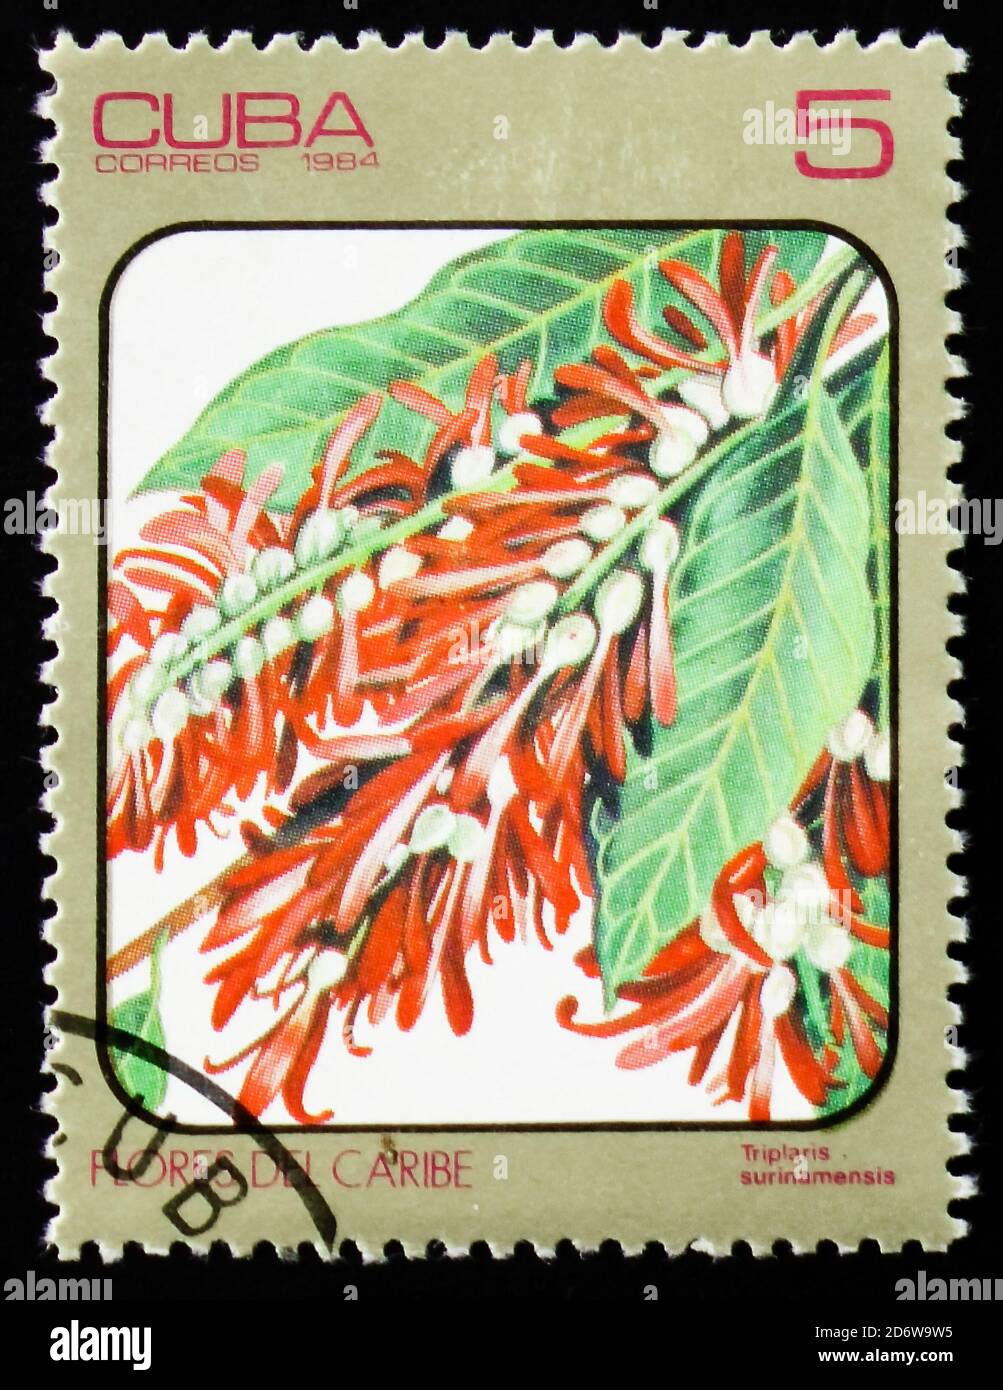 MOSCOW, RUSSIA - FEBRUARY 12, 2017: A stamp printed in Cuba shows Triplaris surinamensis, series of images 'Flowers of Carib', circa 1984 Stock Photo